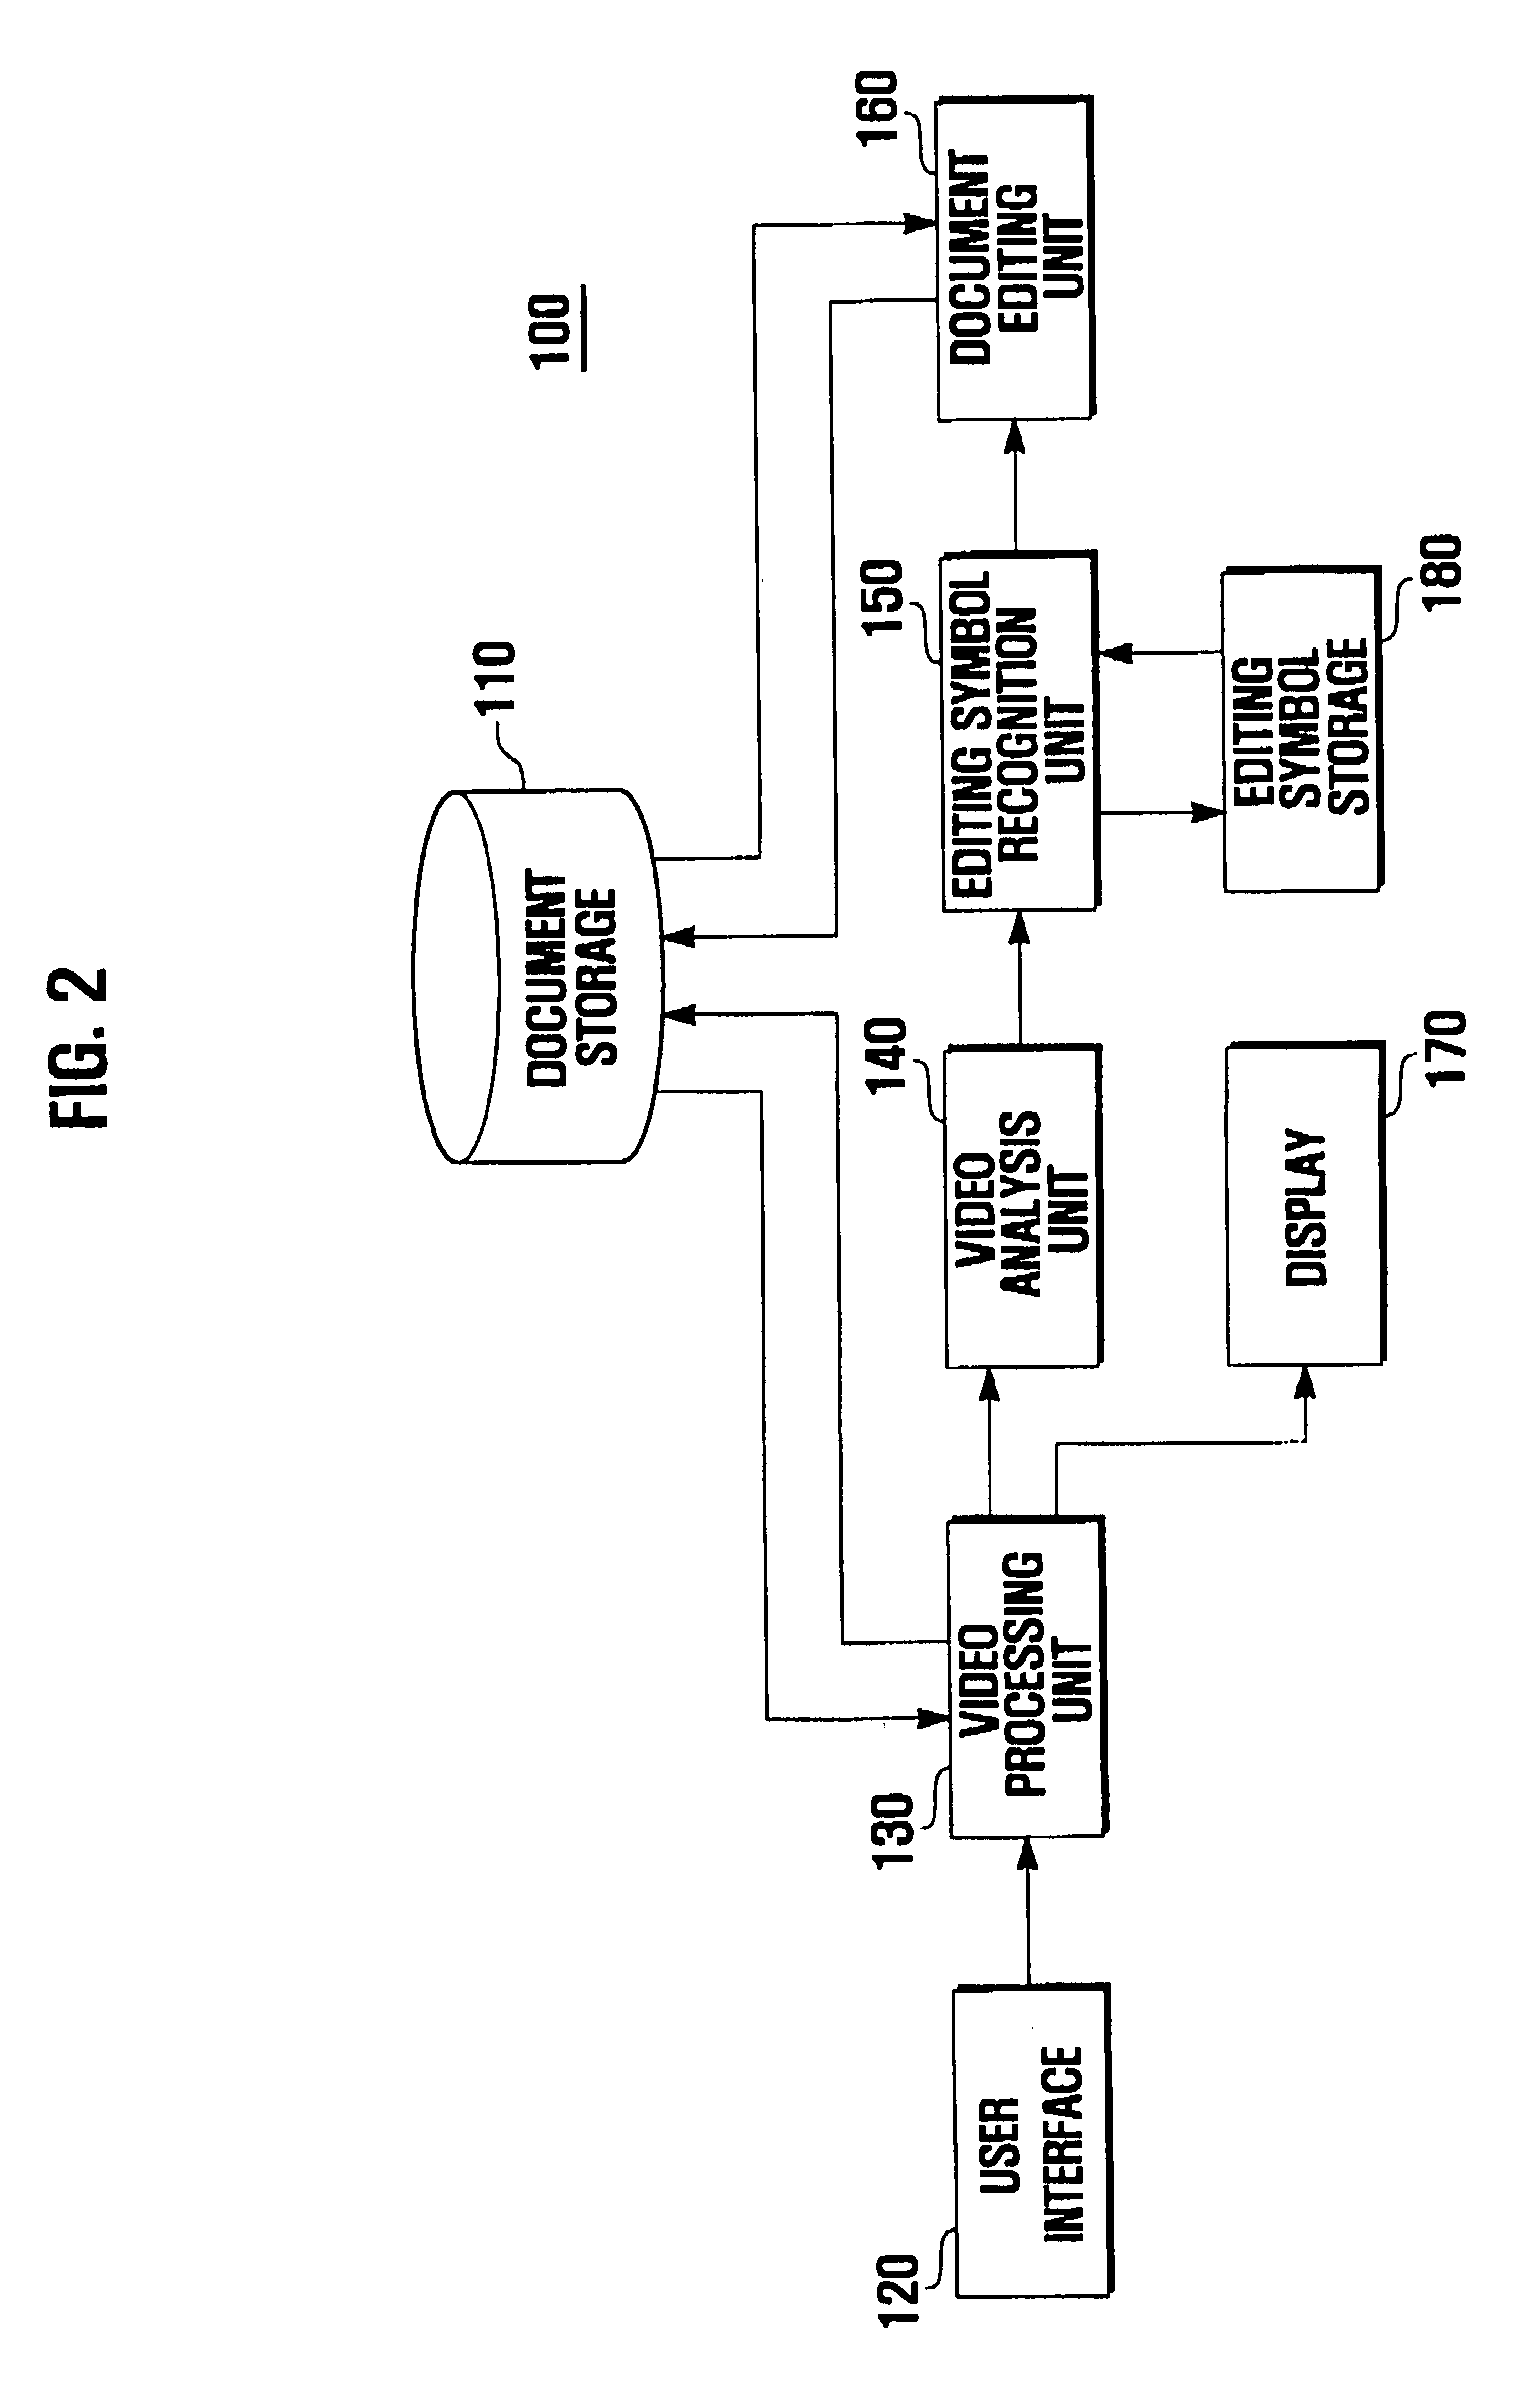 Touch screen-based document editing device and method